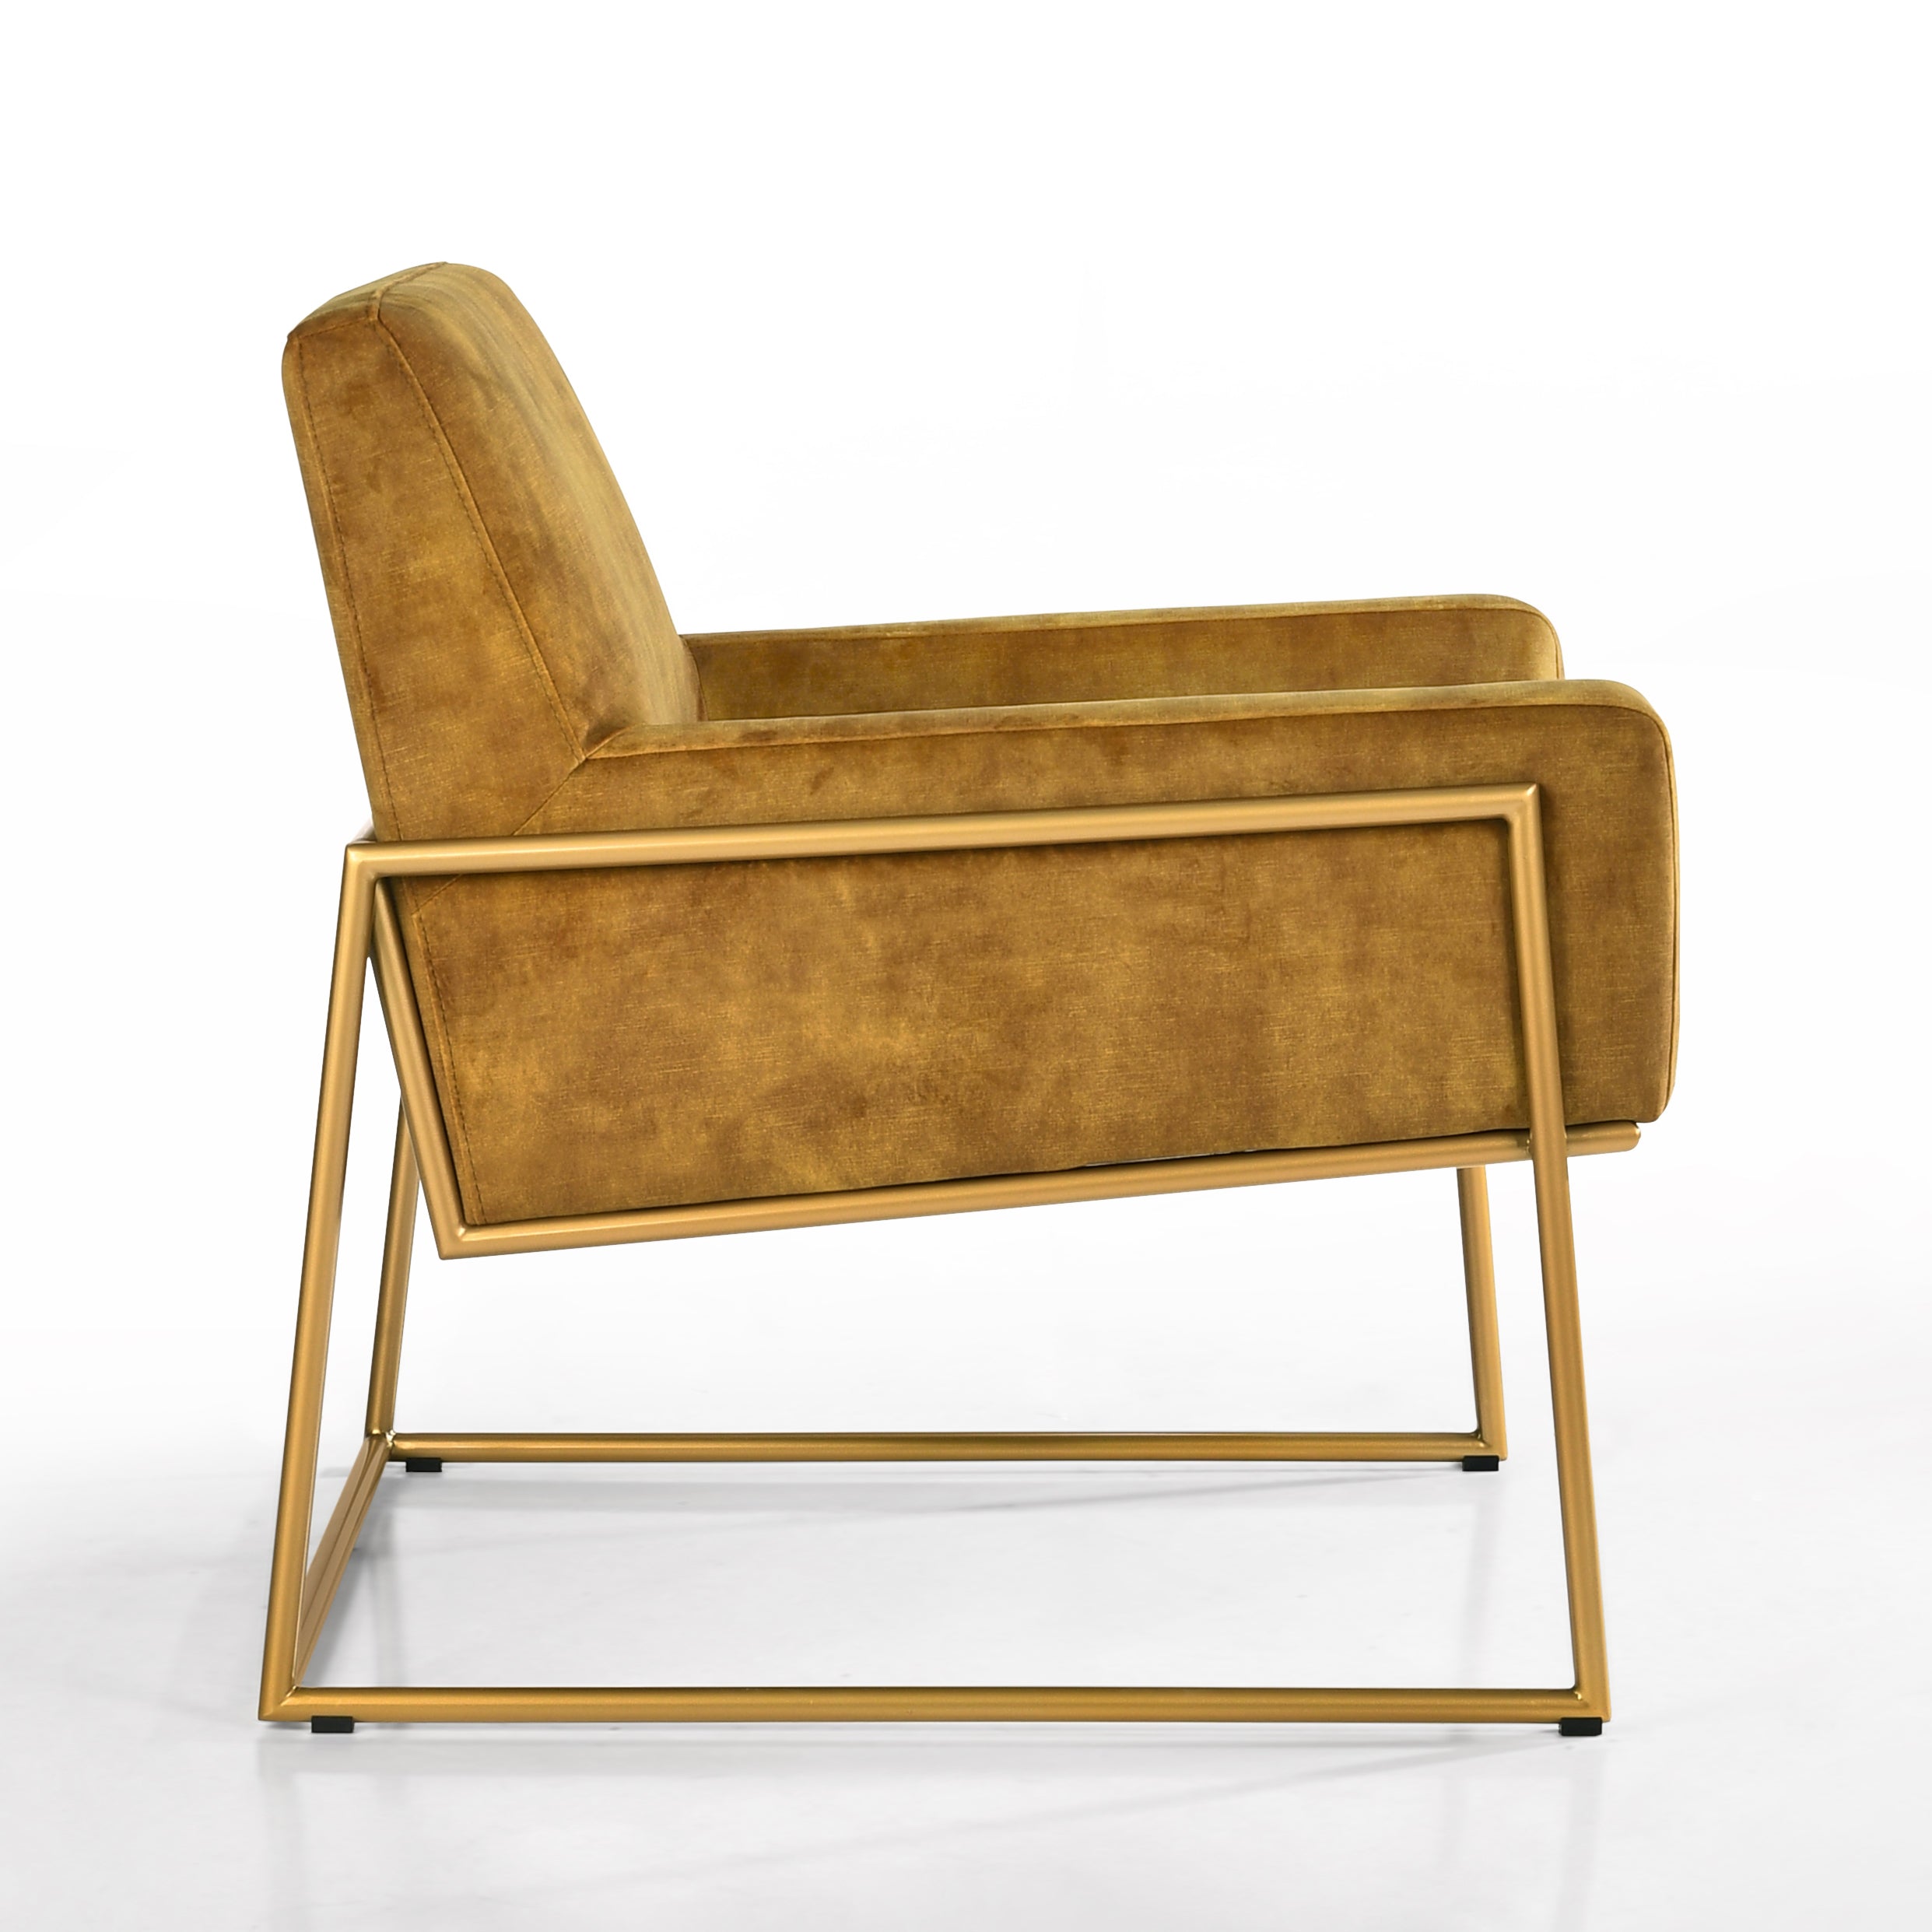 Milano Modern Upholstered Lounge Accent Chair, Gold